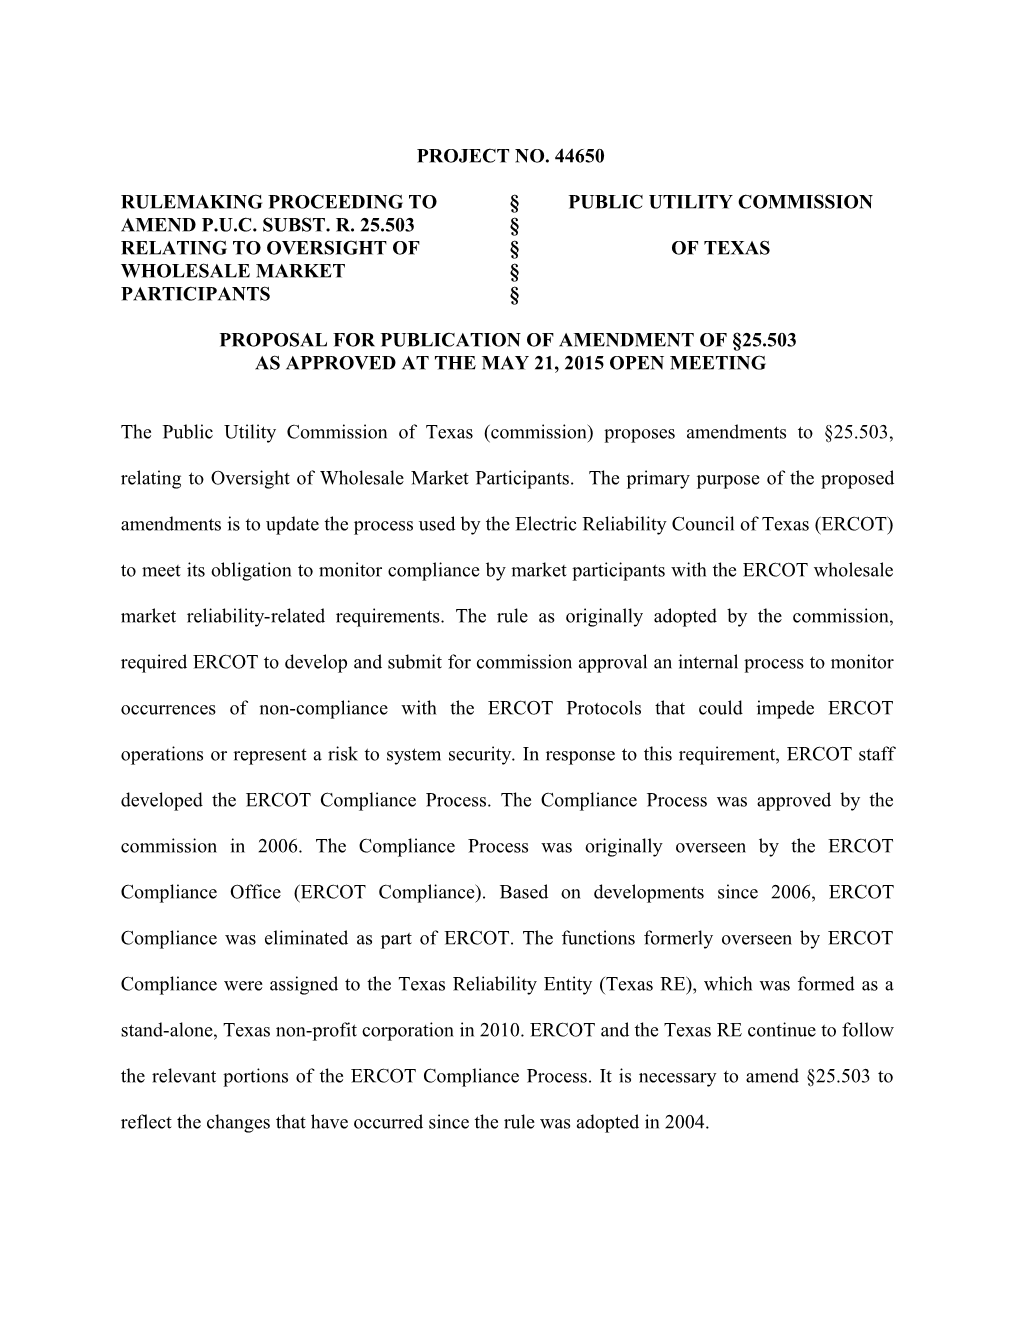 P the Public Utility Commission of Texas (PUC) Proposes an Amendment to PUC Substantive